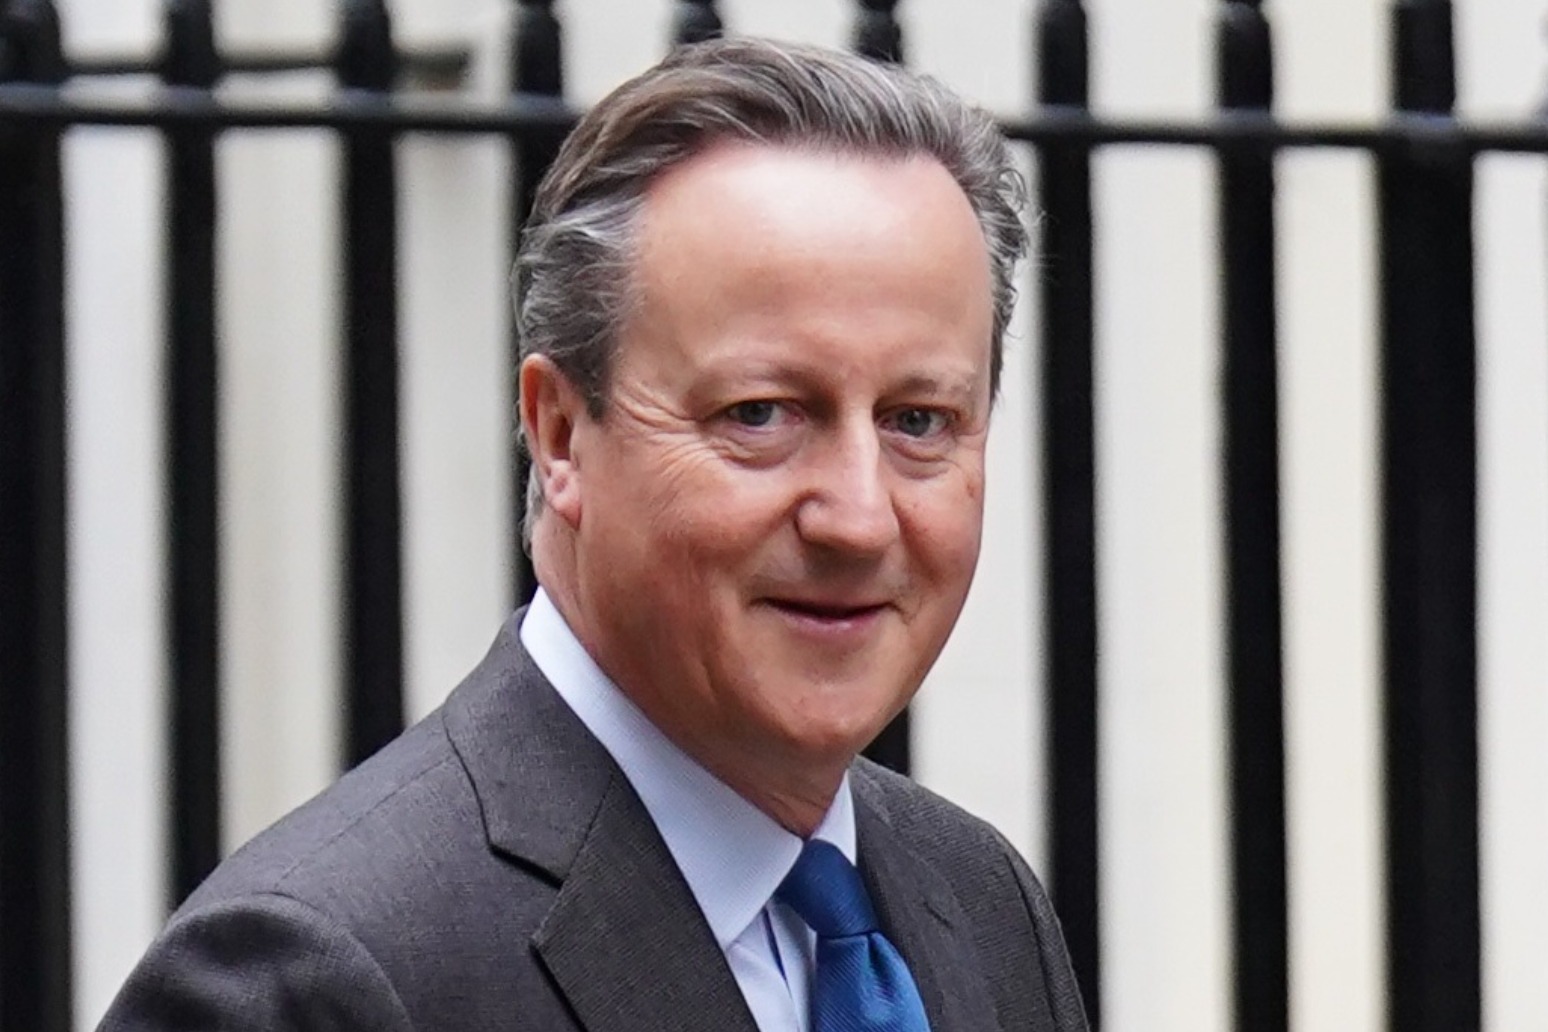 Lord Cameron aims to stop Middle East conflict from ‘spilling over’ during new visit 